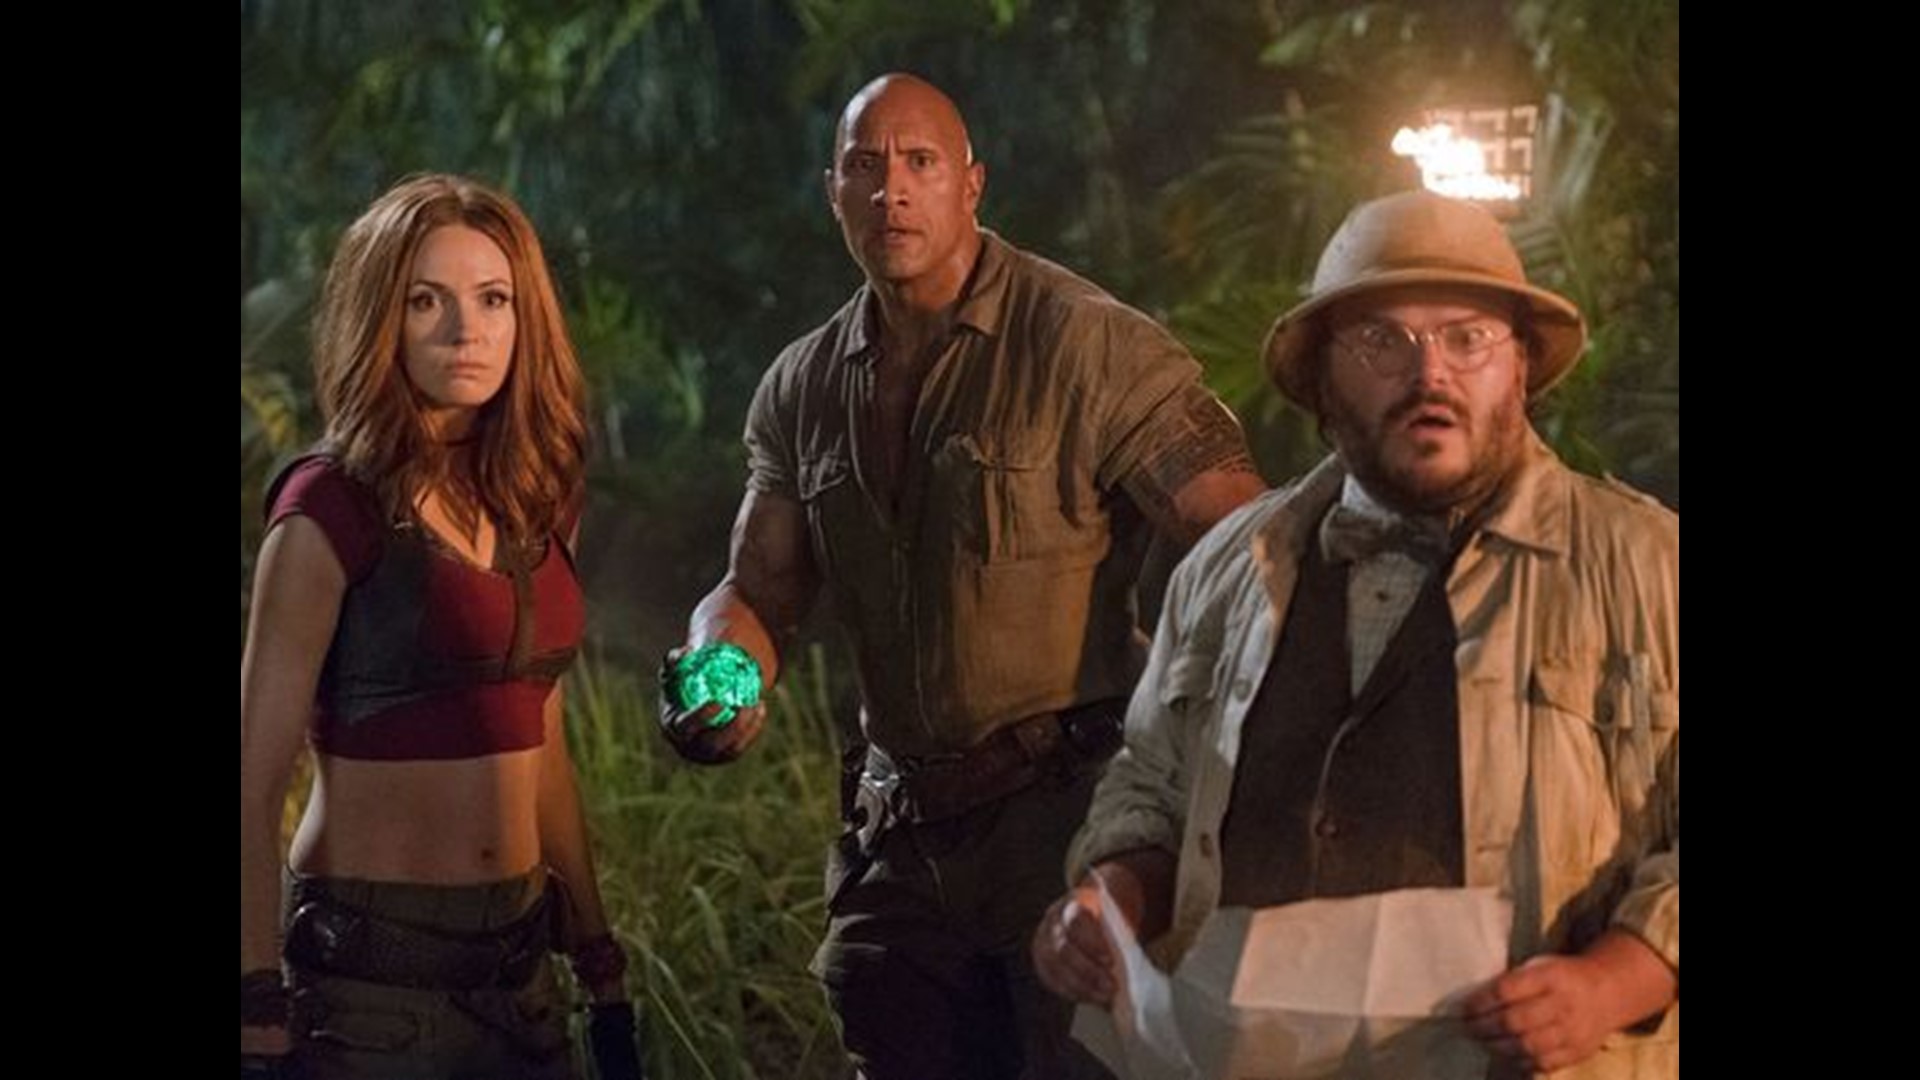 The latest installment in the "Jumanji" movie series is coming in December and Hospice of Michigan is again proud to host a special screening of this new movie.